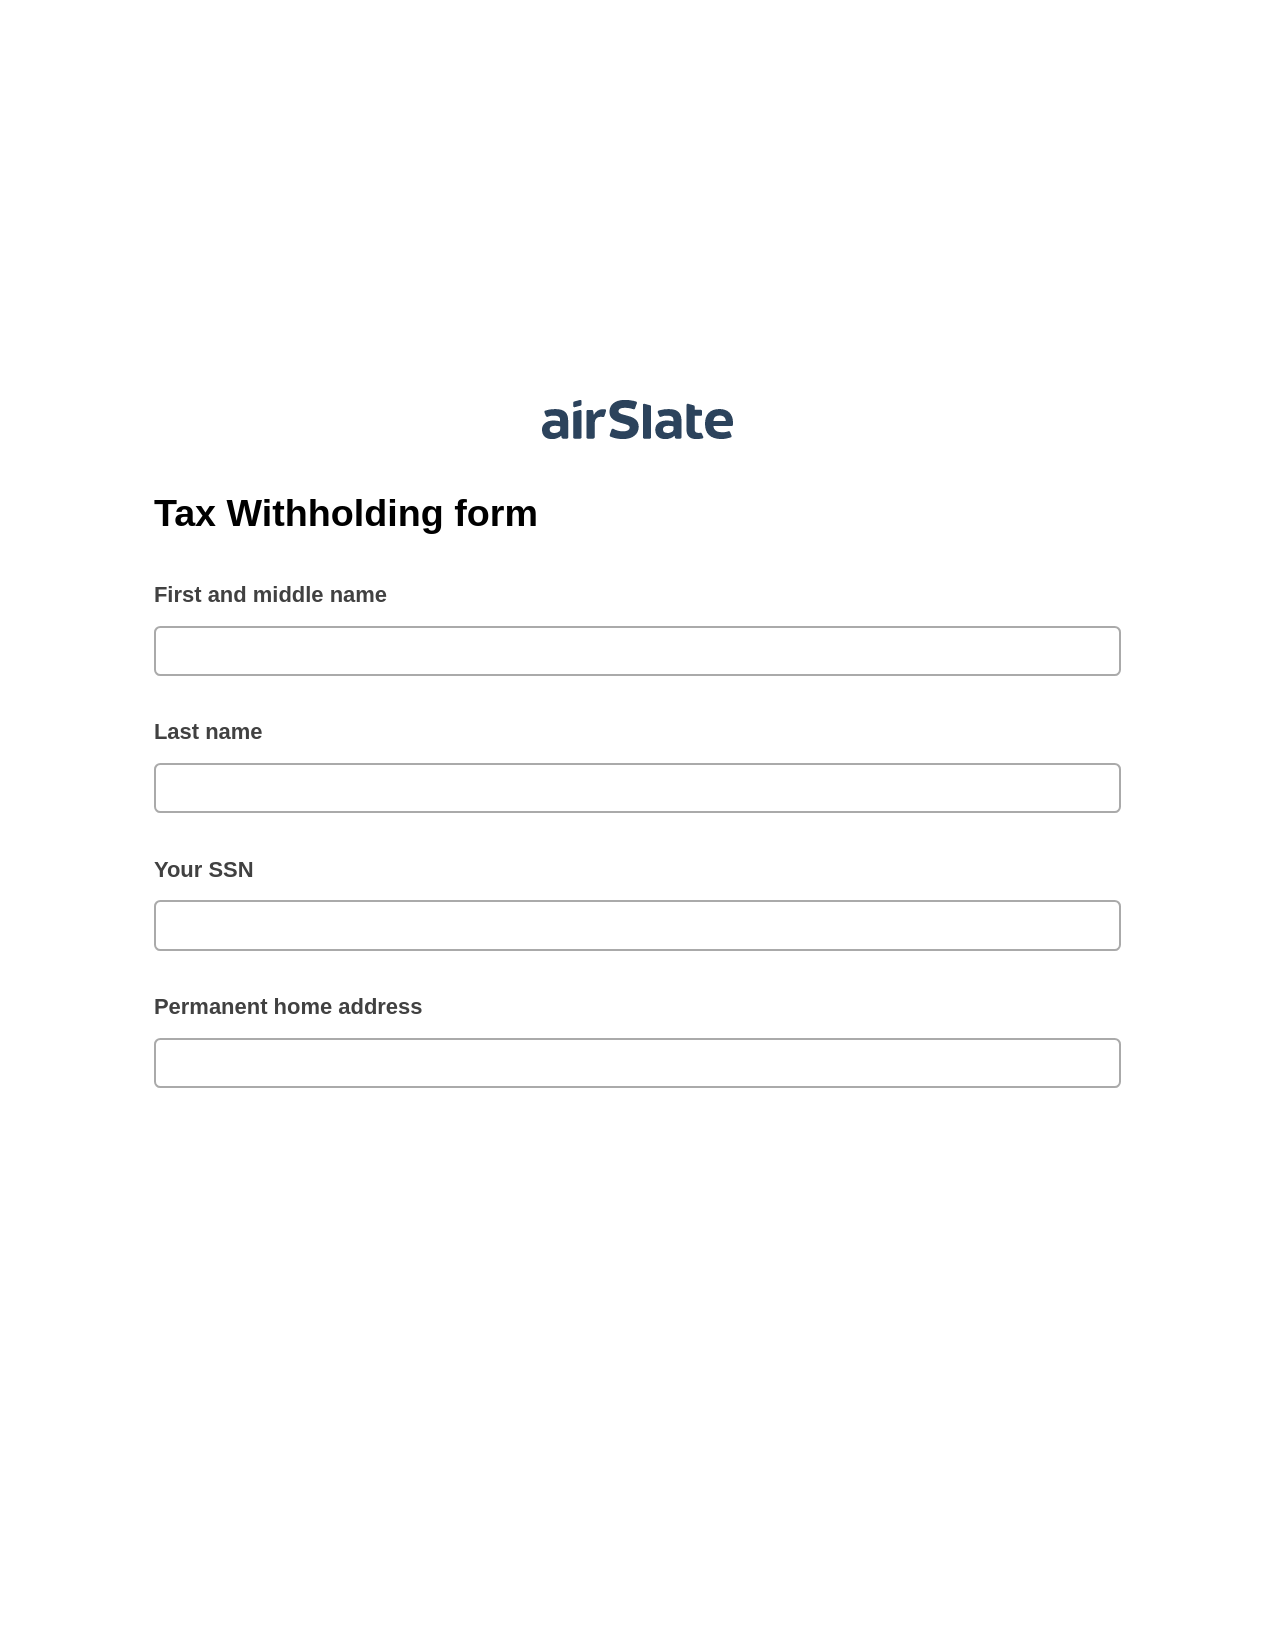 Tax Withholding form Pre-fill Document Bot, Unassign Role Bot, Email Notification Postfinish Bot